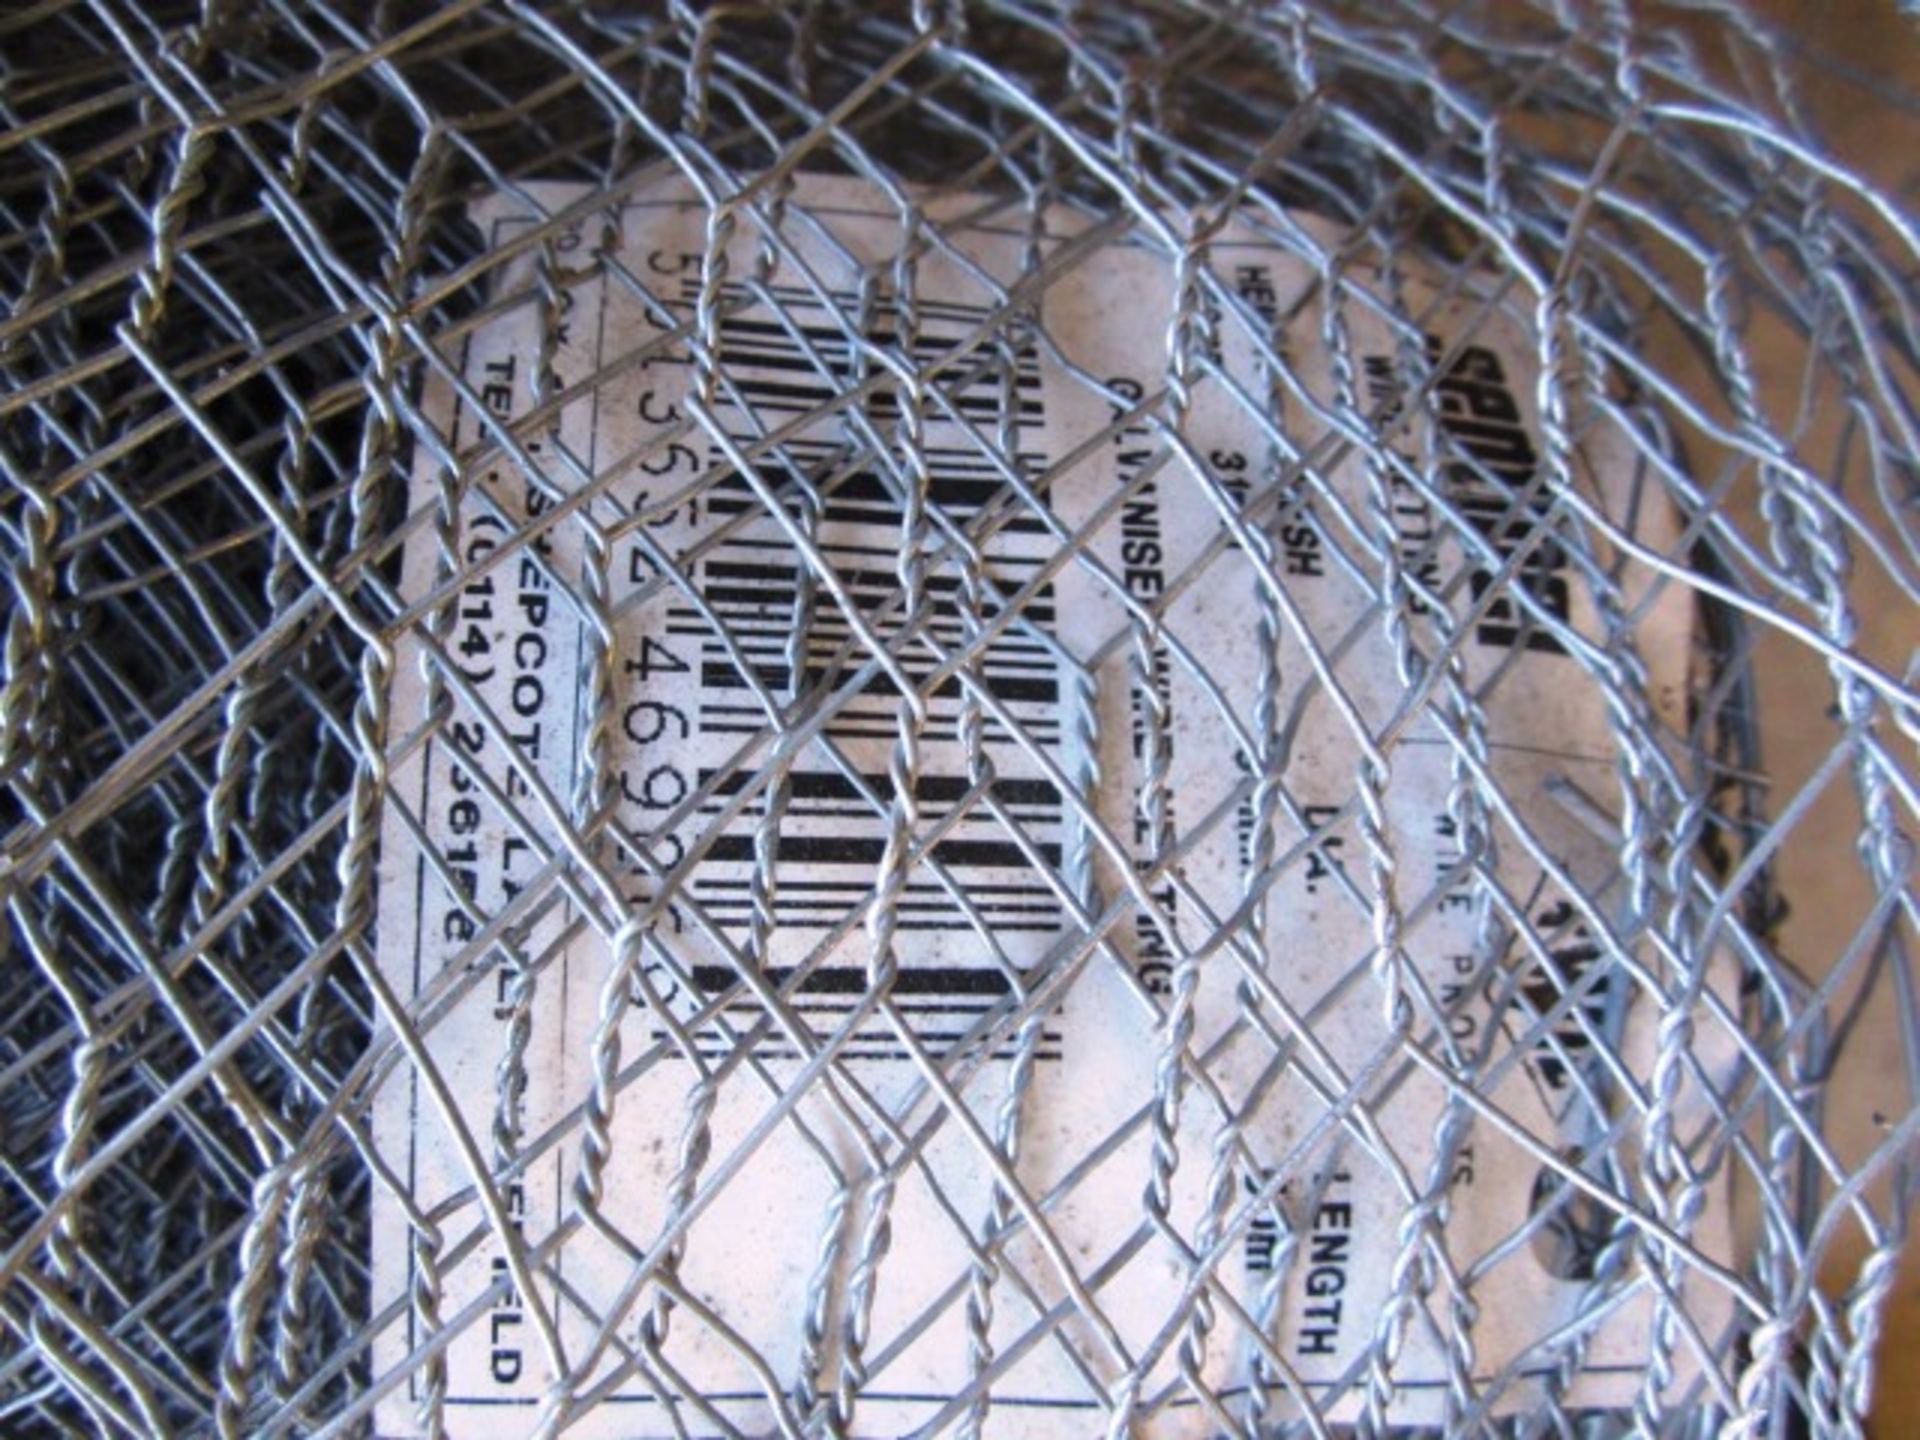 Part reel of galvanised wire netting, approx. height 1m - Image 3 of 3